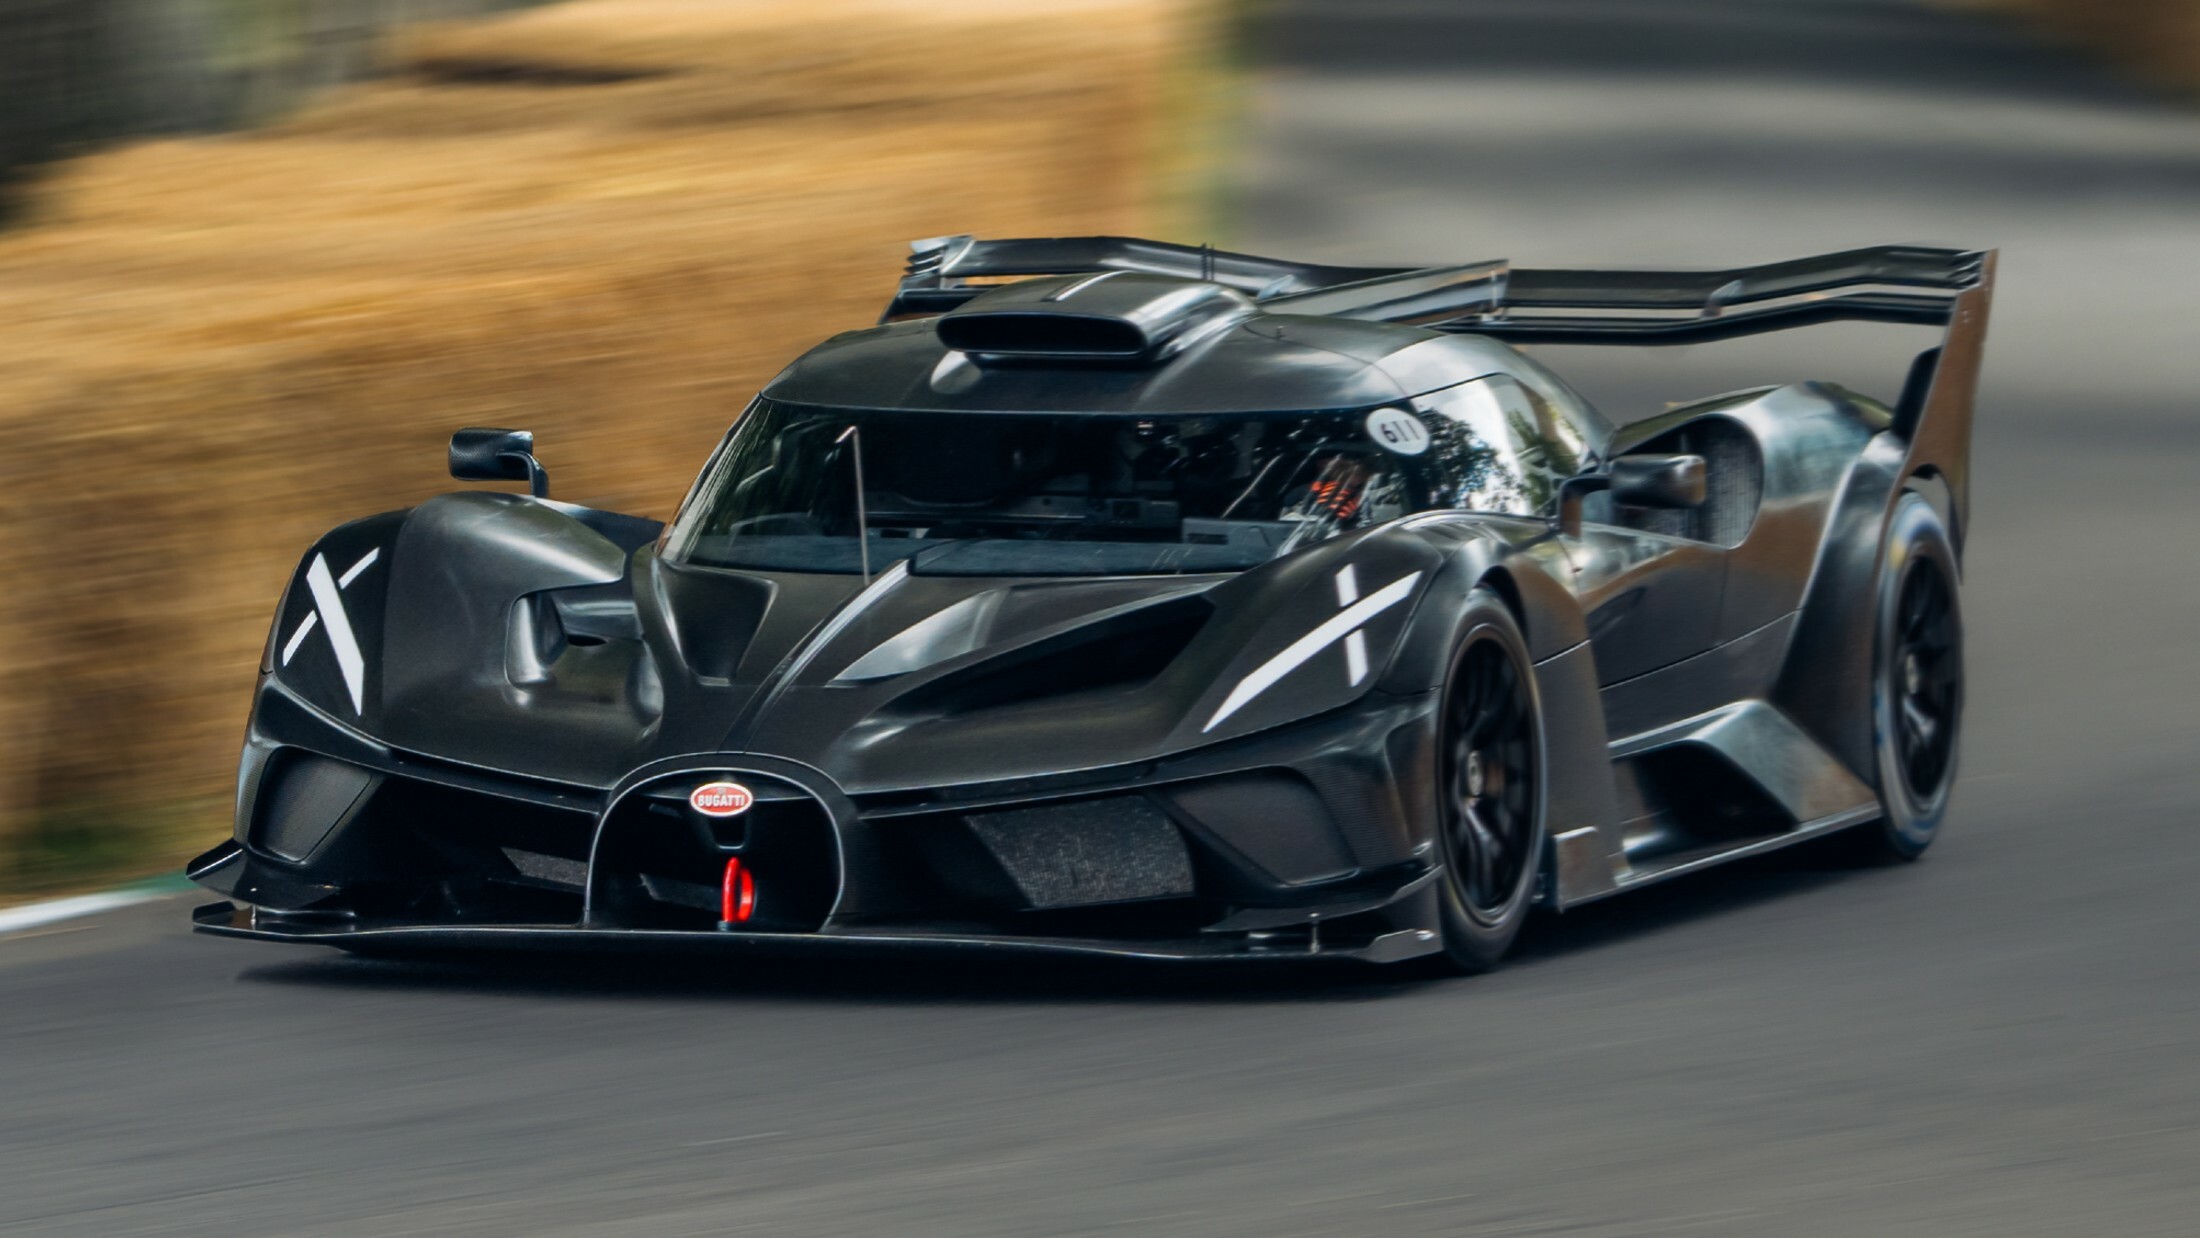 1578-HP Bugatti Bolide Track-Only Hypercar Going into Production